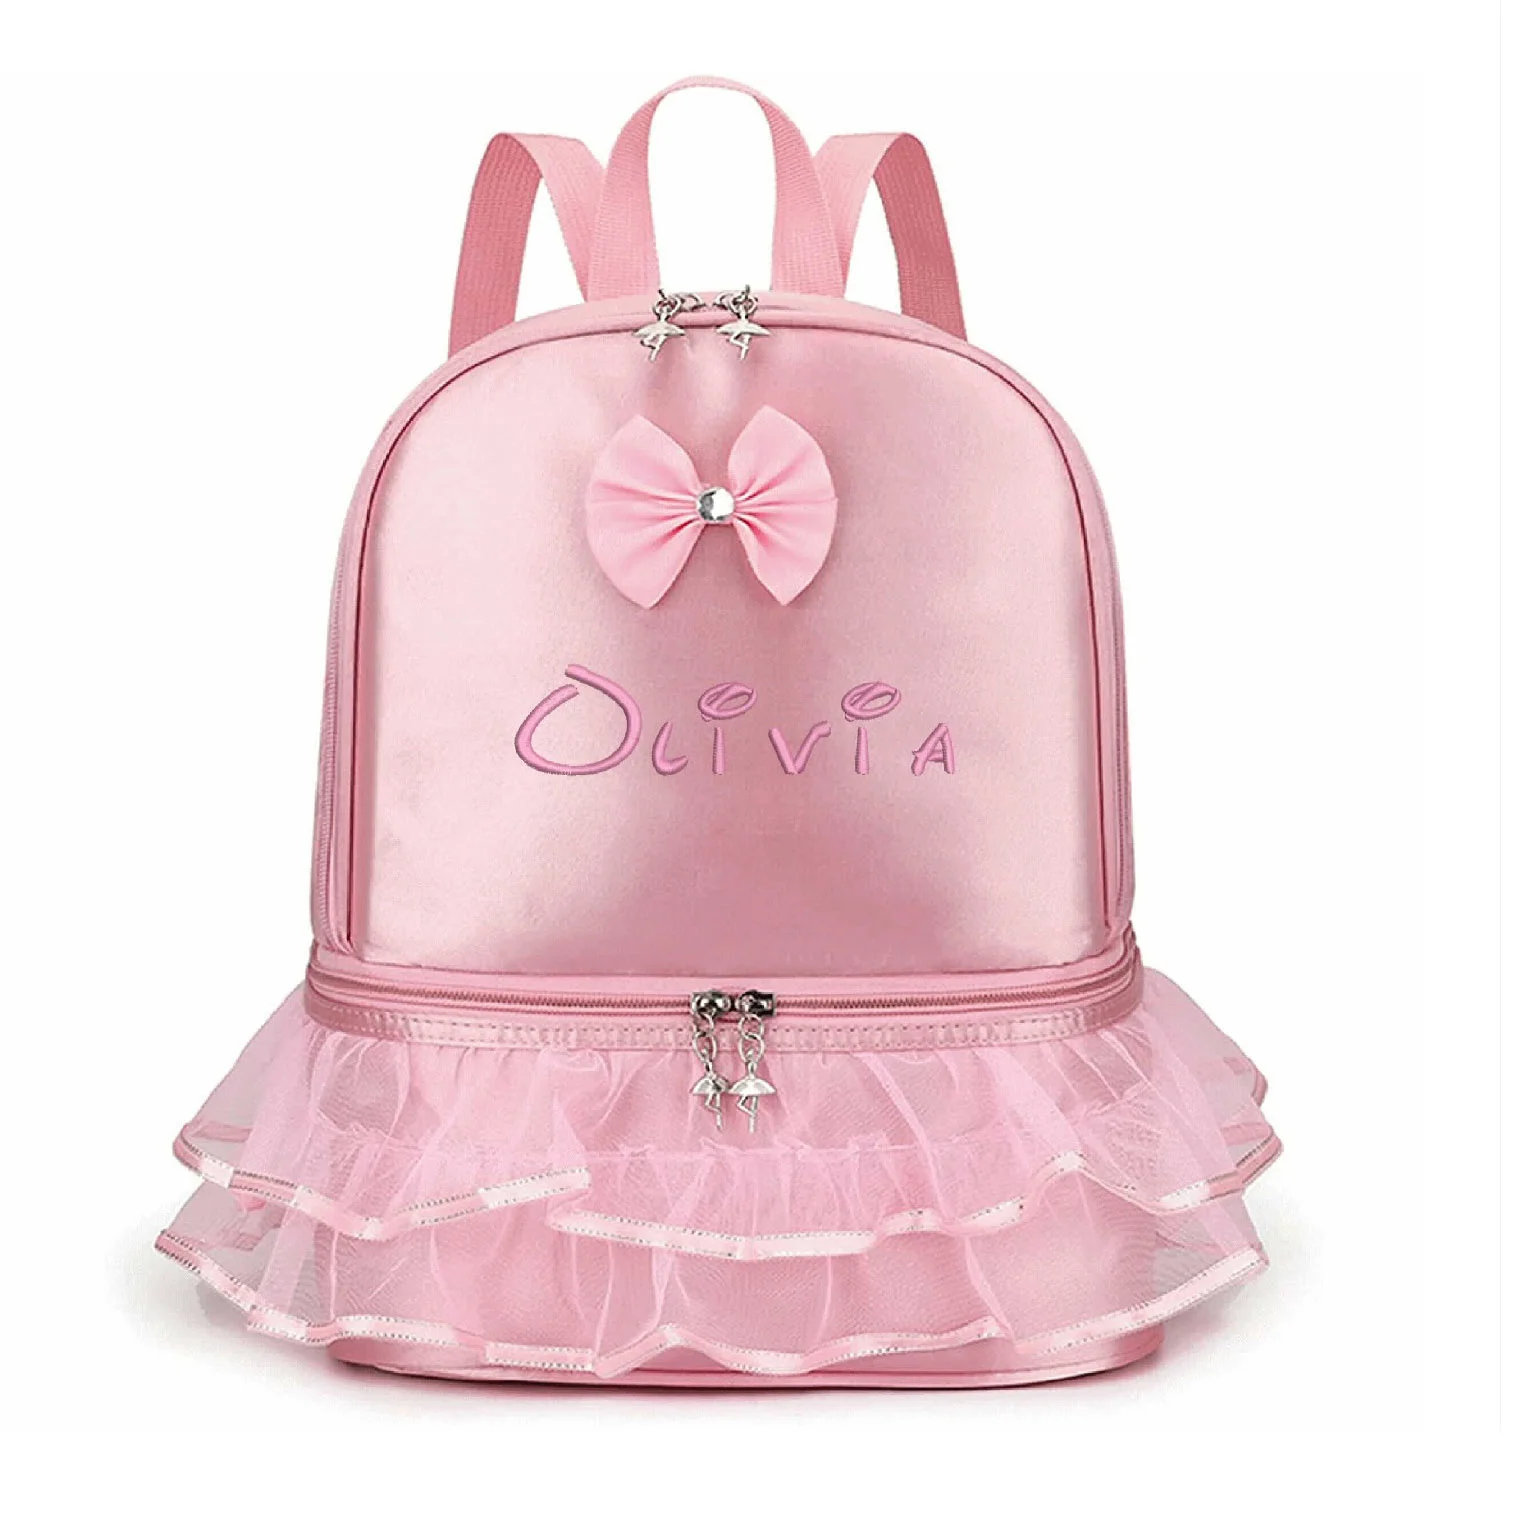 

Personalized Embroidered Ballet Bag Little Girls Ballerina Dance Backpack with Separate Shoe Compartment for Dance Toddler Bag